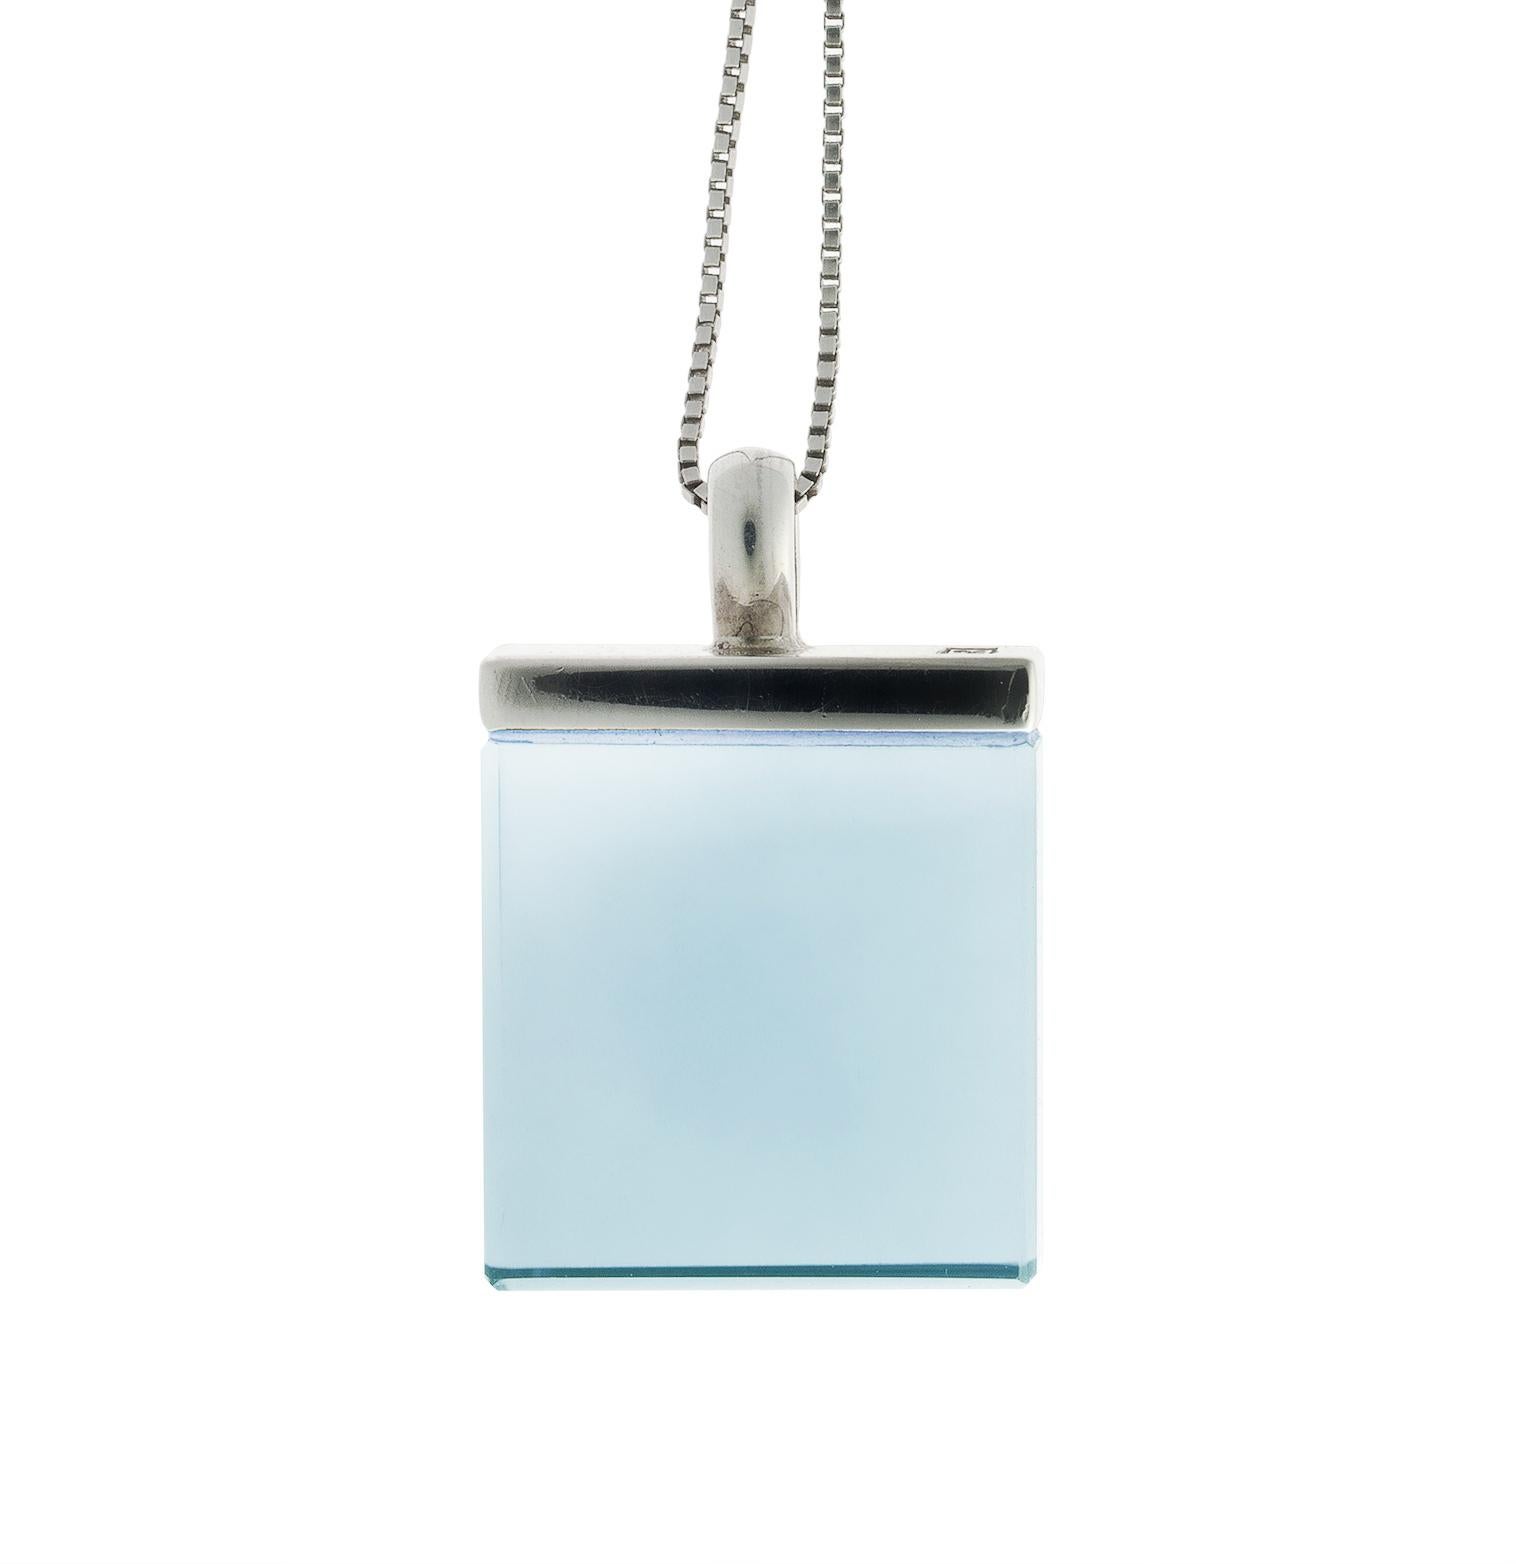 This designer pendant necklace features a 15x15x8 mm blue quartz set in sterling silver. It is part of the Ink collection, which has been featured in publications such as Harper's Bazaar and Vogue UA.

The pendant's pale sky blue quartz is cut in an